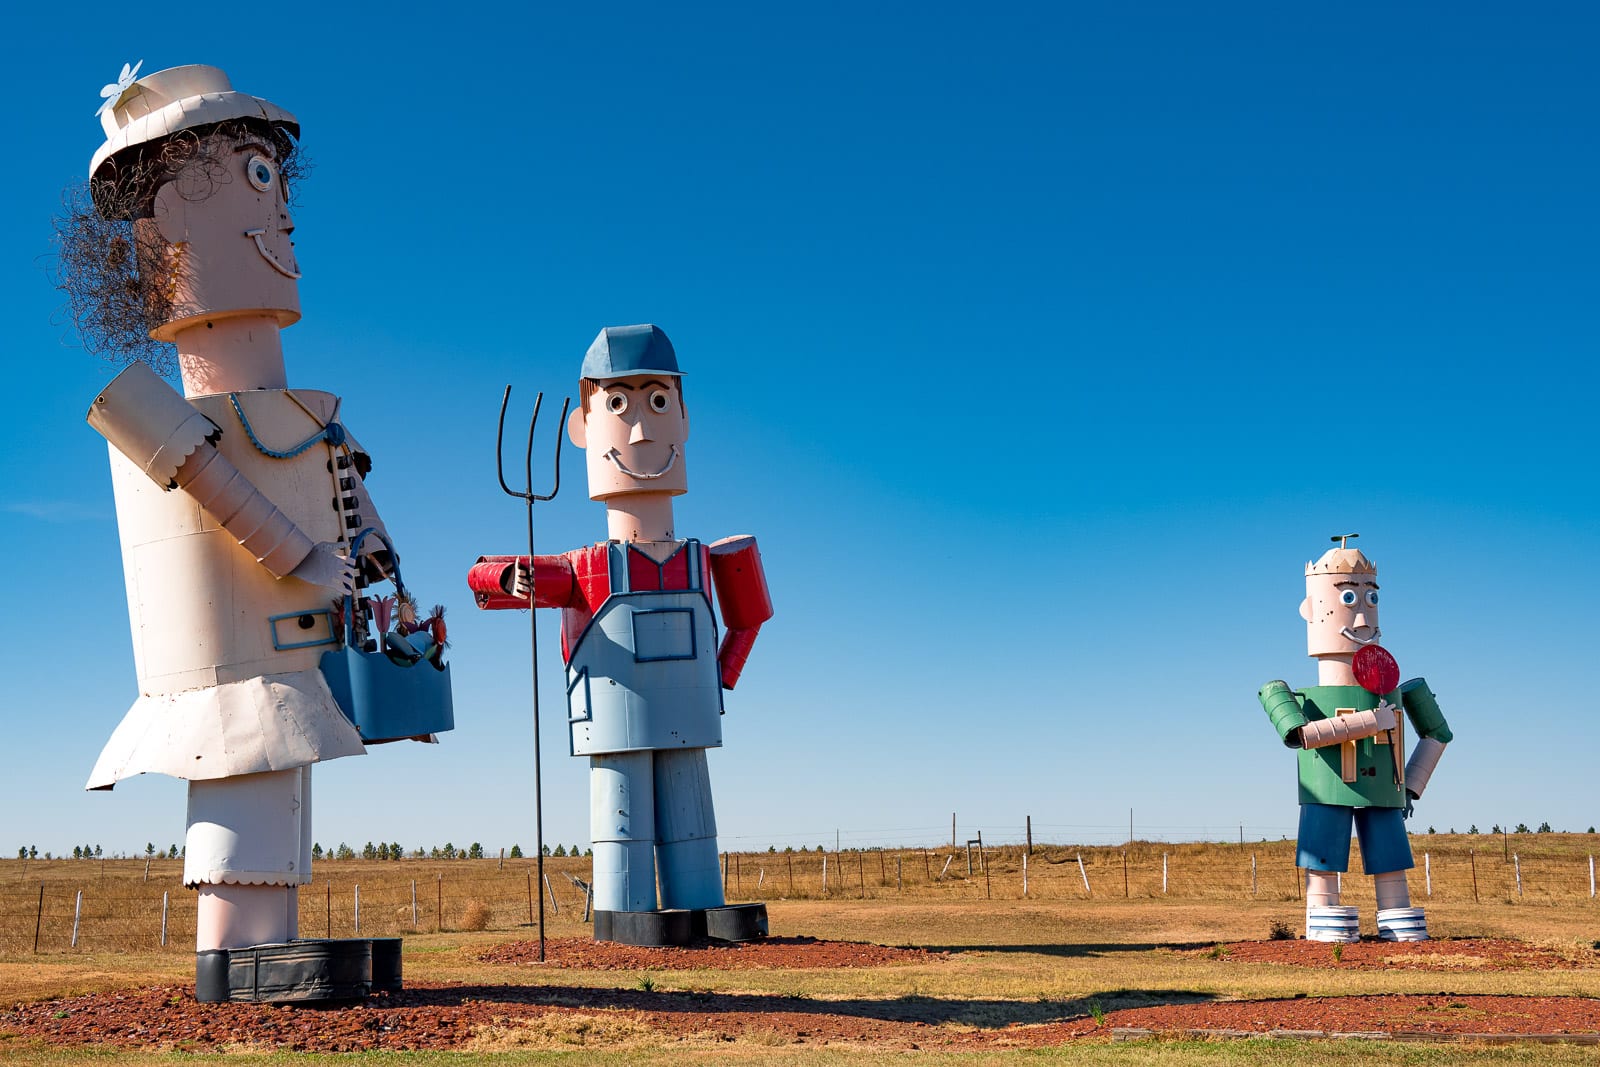 This is an overview of the characters in the sculpture by Gary Greff called The Tin Family. It is located along the Enchanted Highway running between I-94 and Regent, North Dakota.